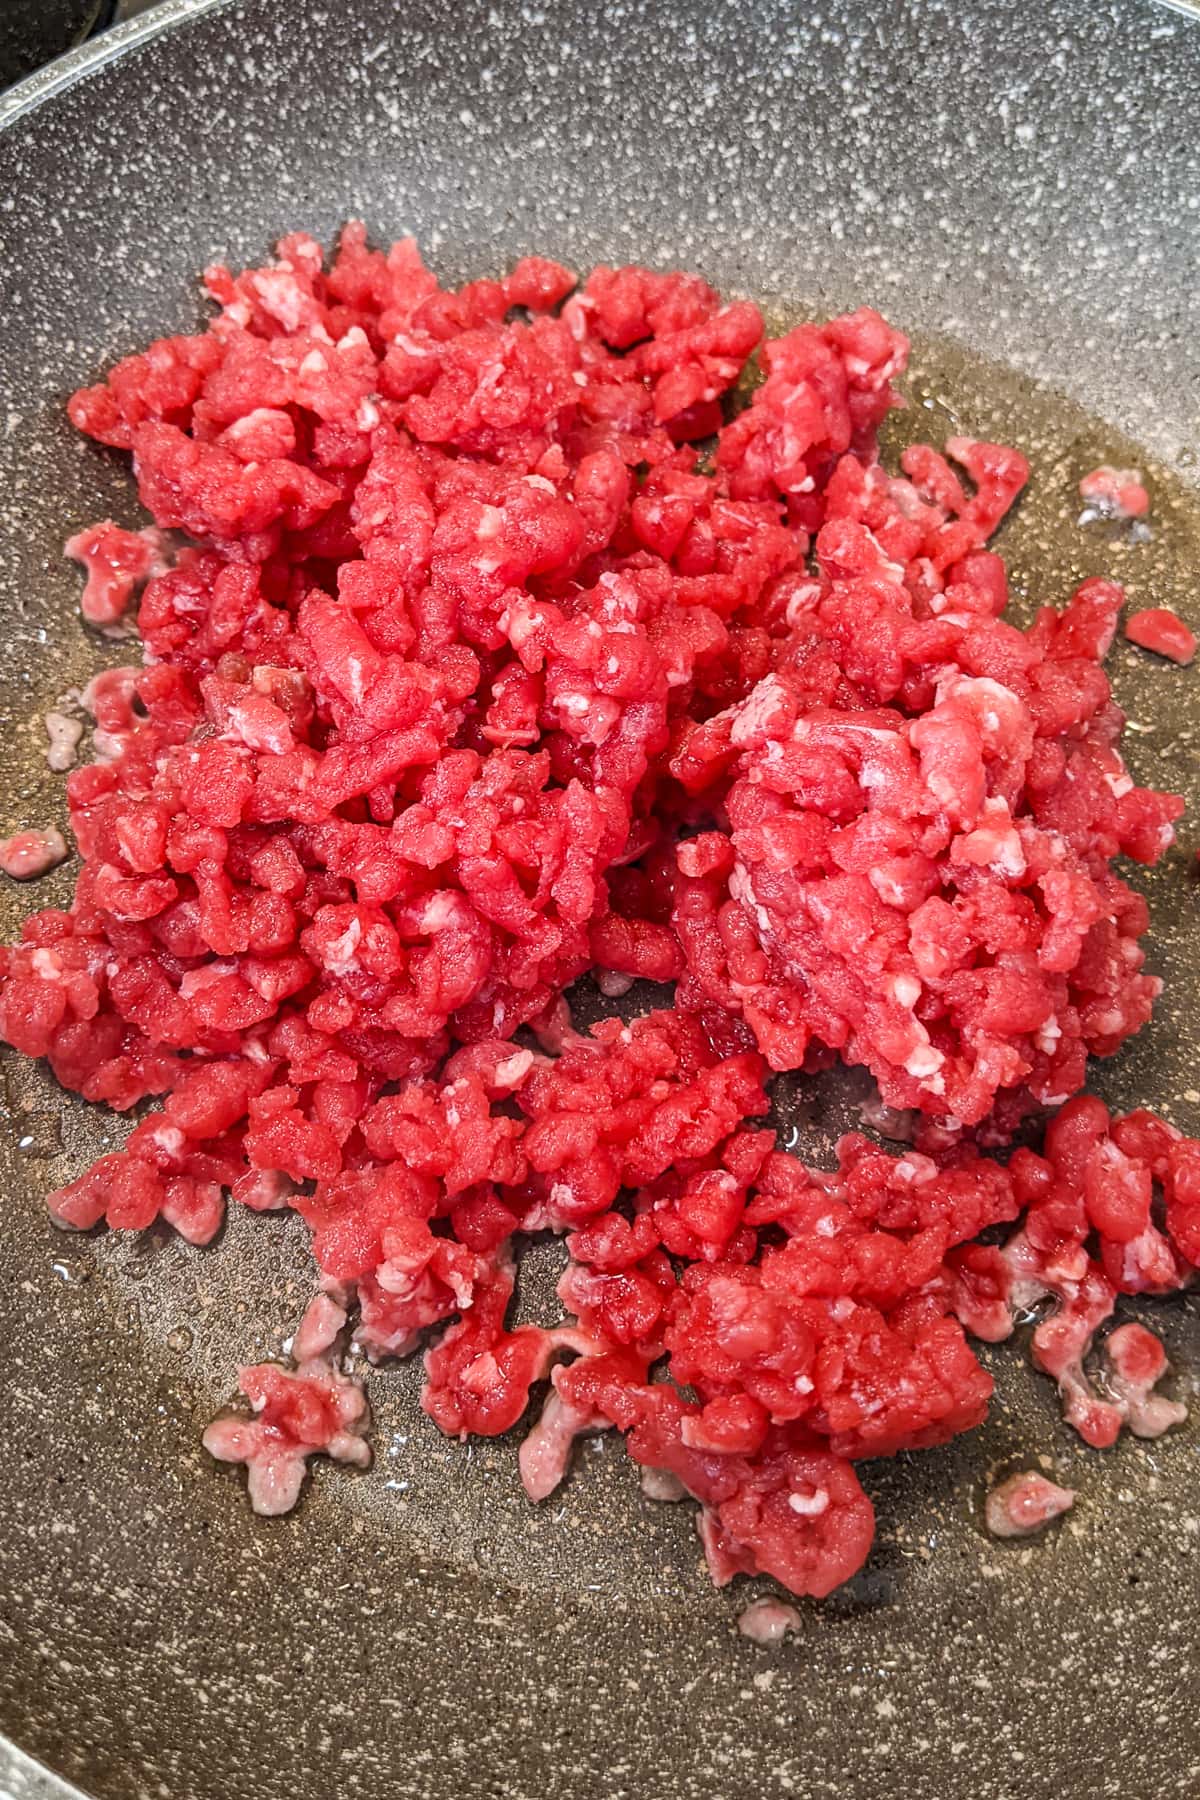 Frying ground beef on a frying pan.